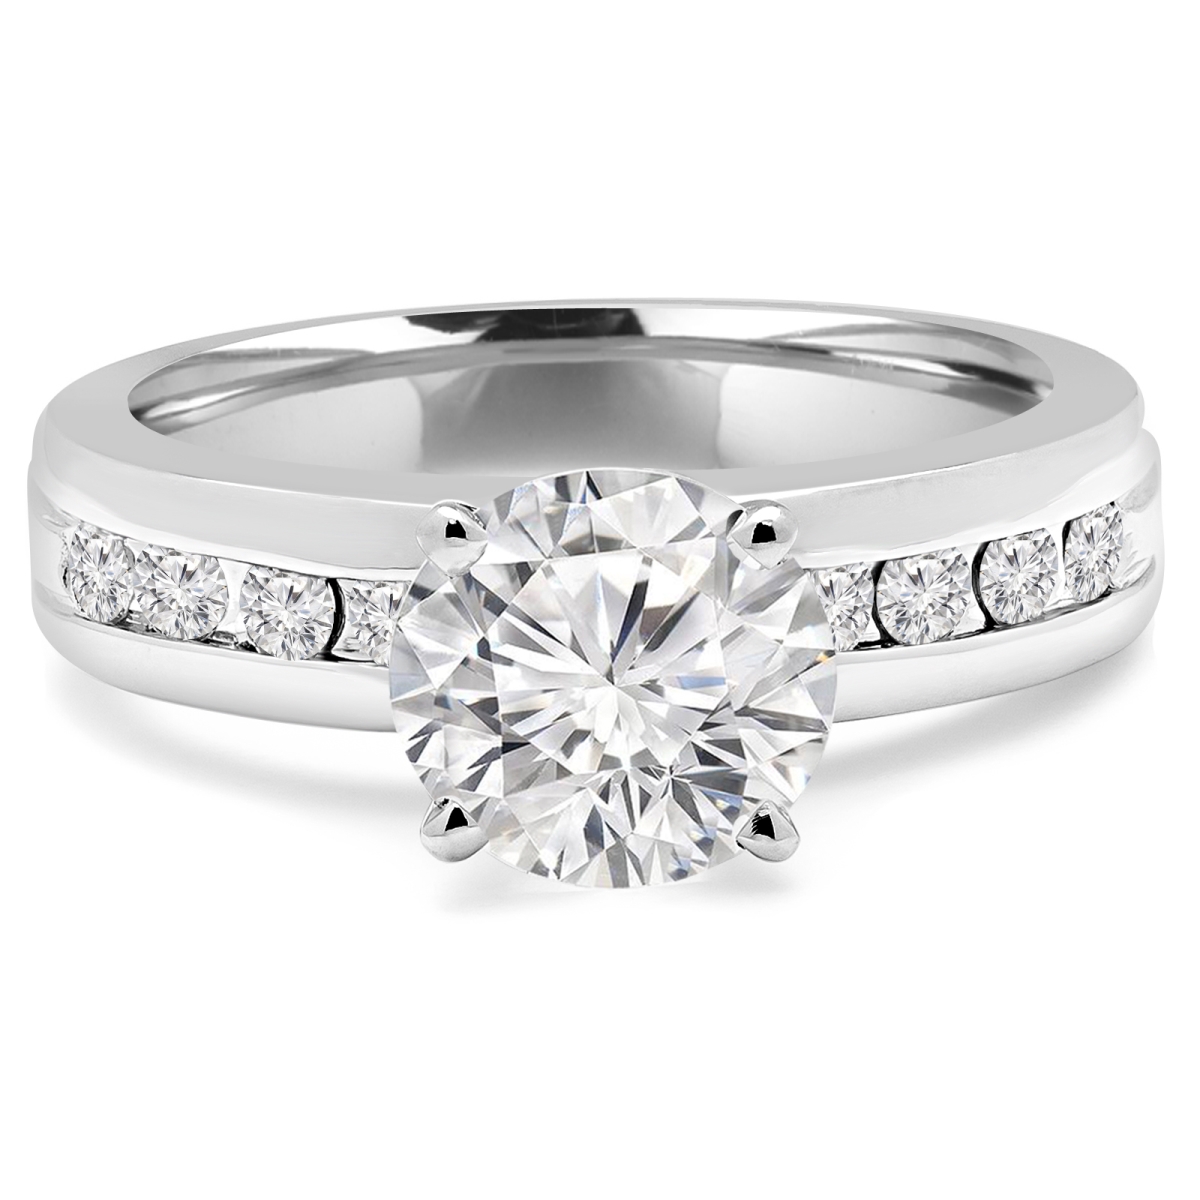 1.4 CTW Round Diamond Solitaire Engagement Ring with Channel Set Accents in 14K White Gold - Size 4 -  Great Gems, GR3071405